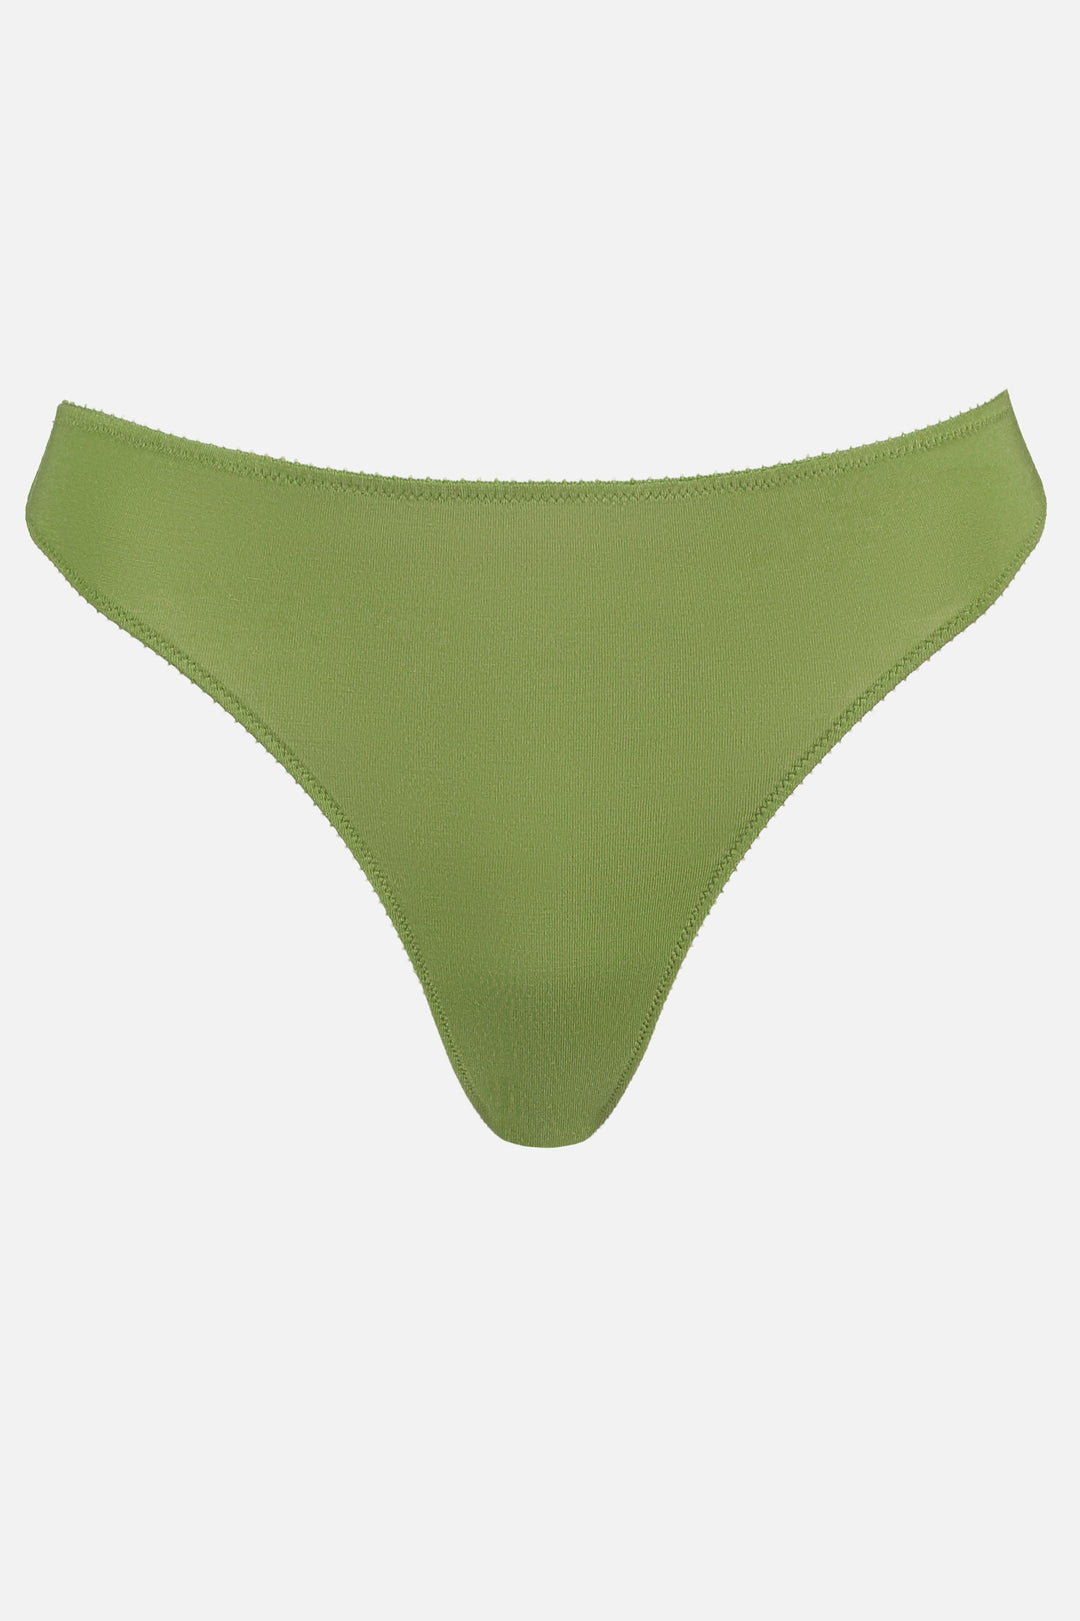 Videris Lingerie thong in bohemian olive TENCEL™ a comfortable mid-rise style cut to follow the natural curve of your hips